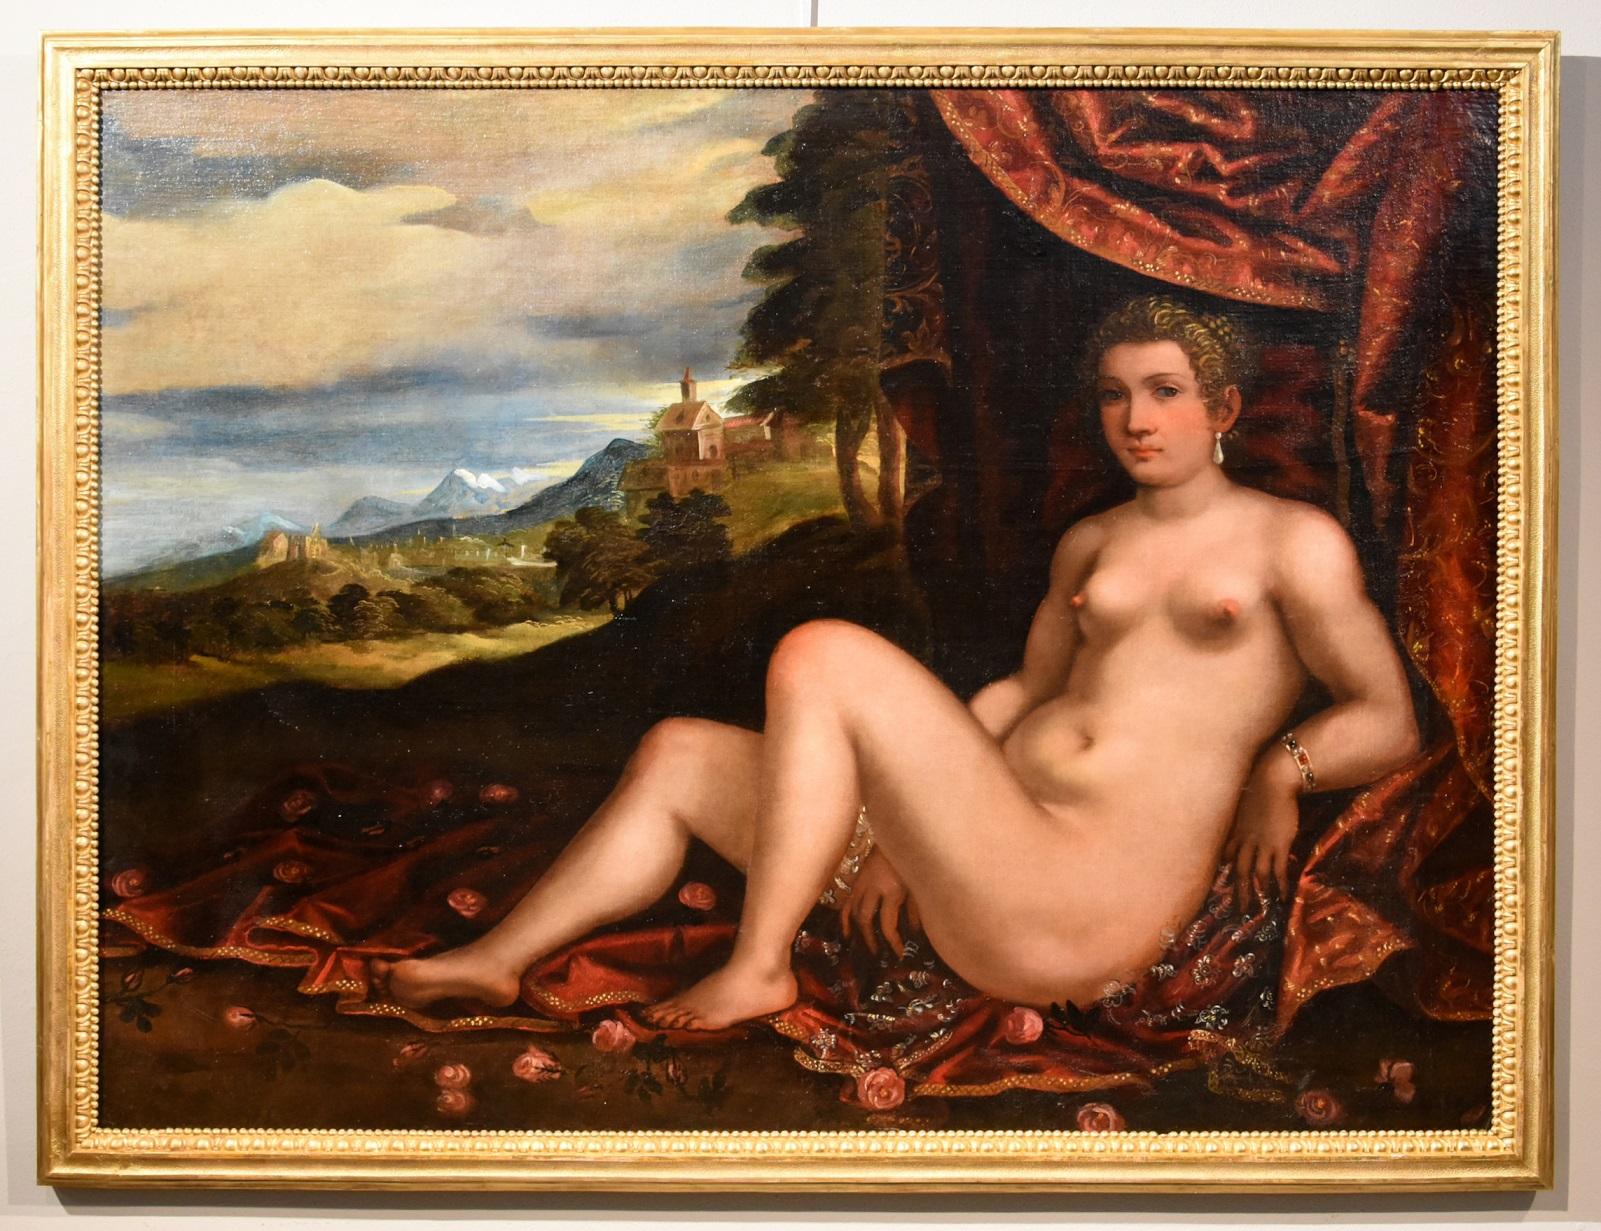 Venus Paolo Fiammingo Paint Oil on canvas Old master 16th Century Italian Art - Painting by Unknown